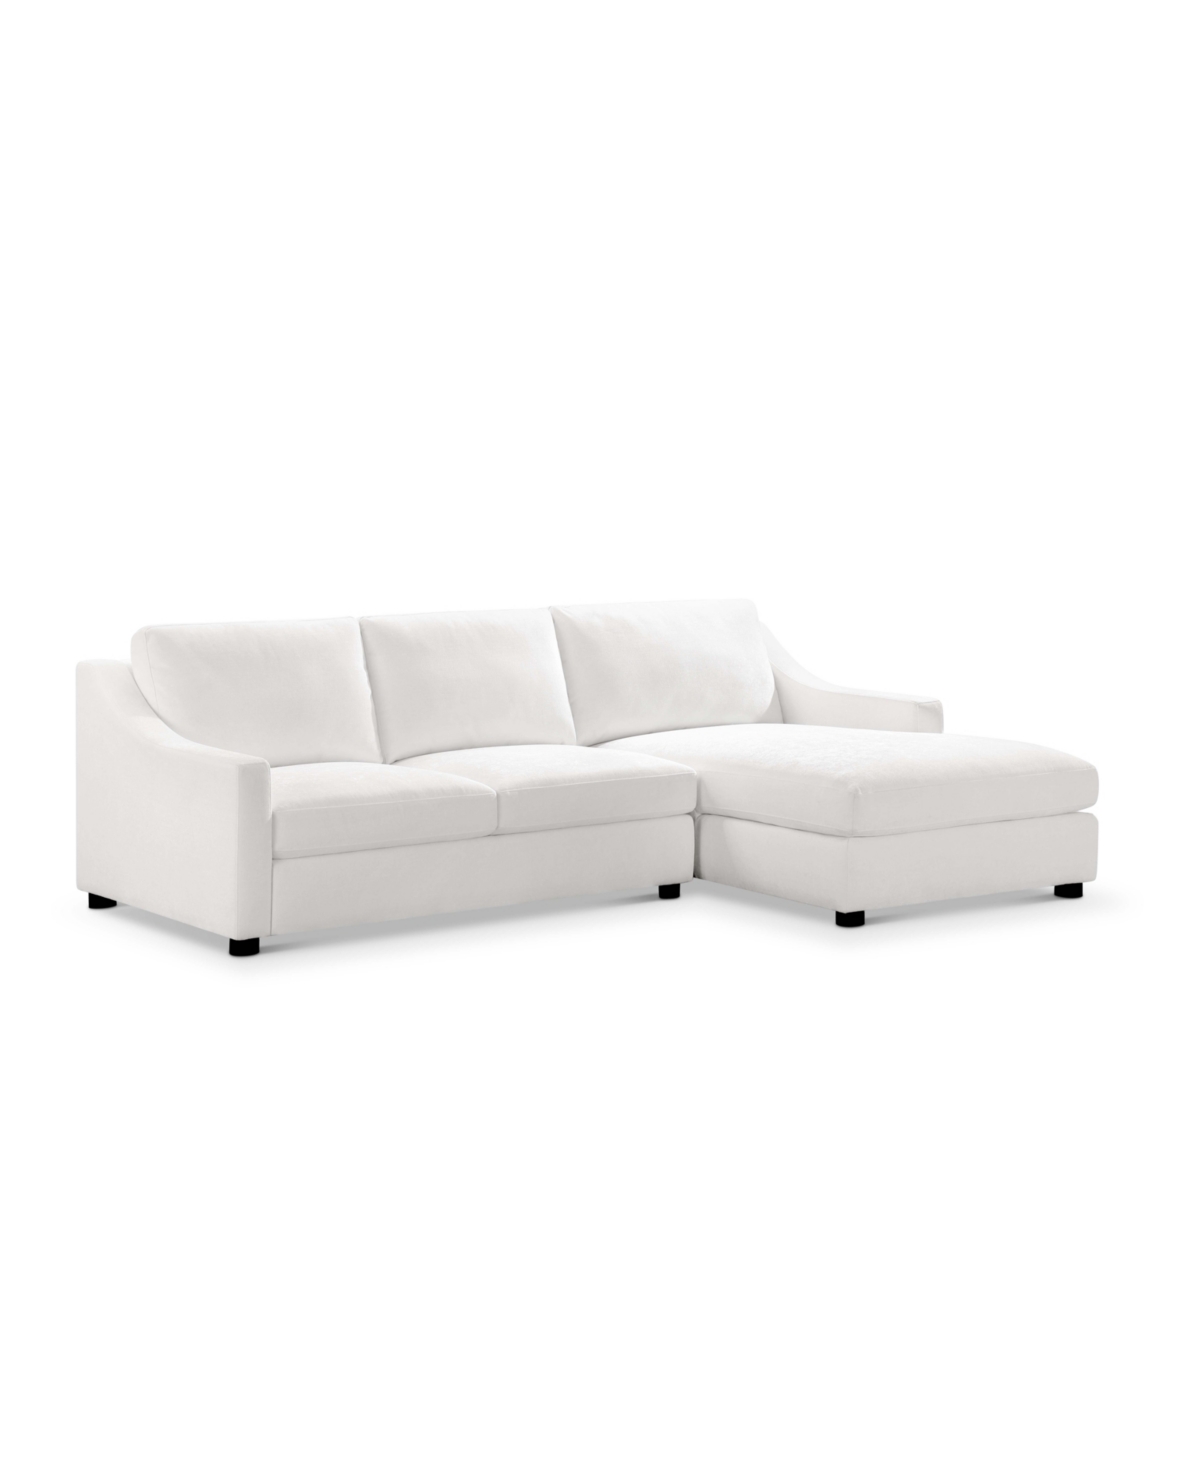 Abbyson Living Garcelle 2 Piece Stain-resistant Fabric Sectional In White